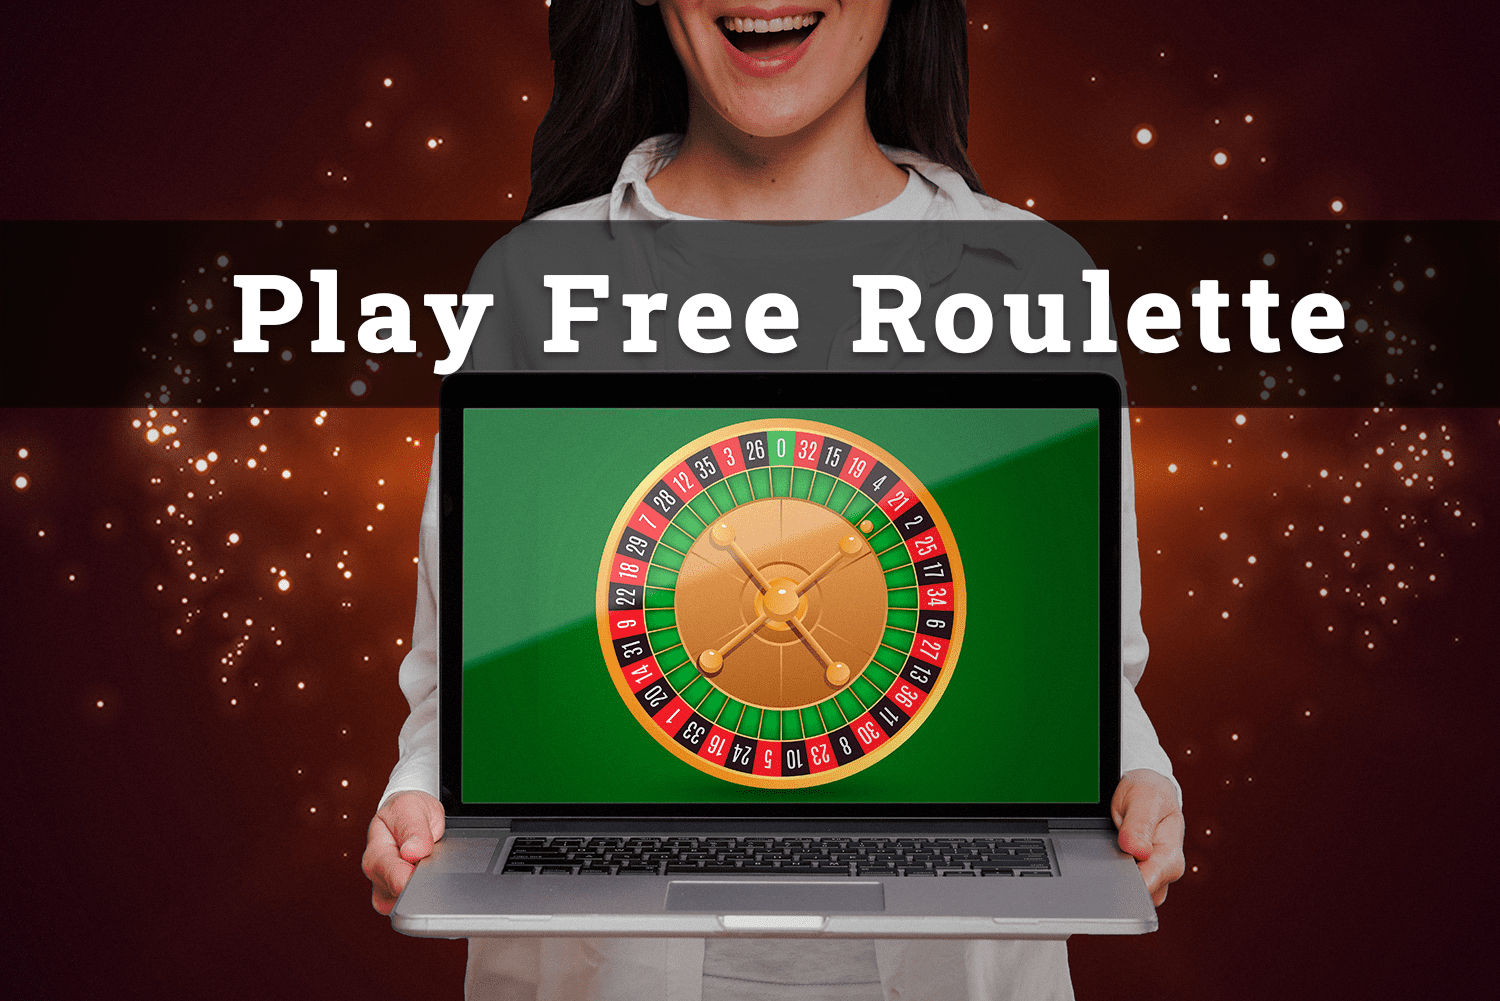 Play free roulette qltxw